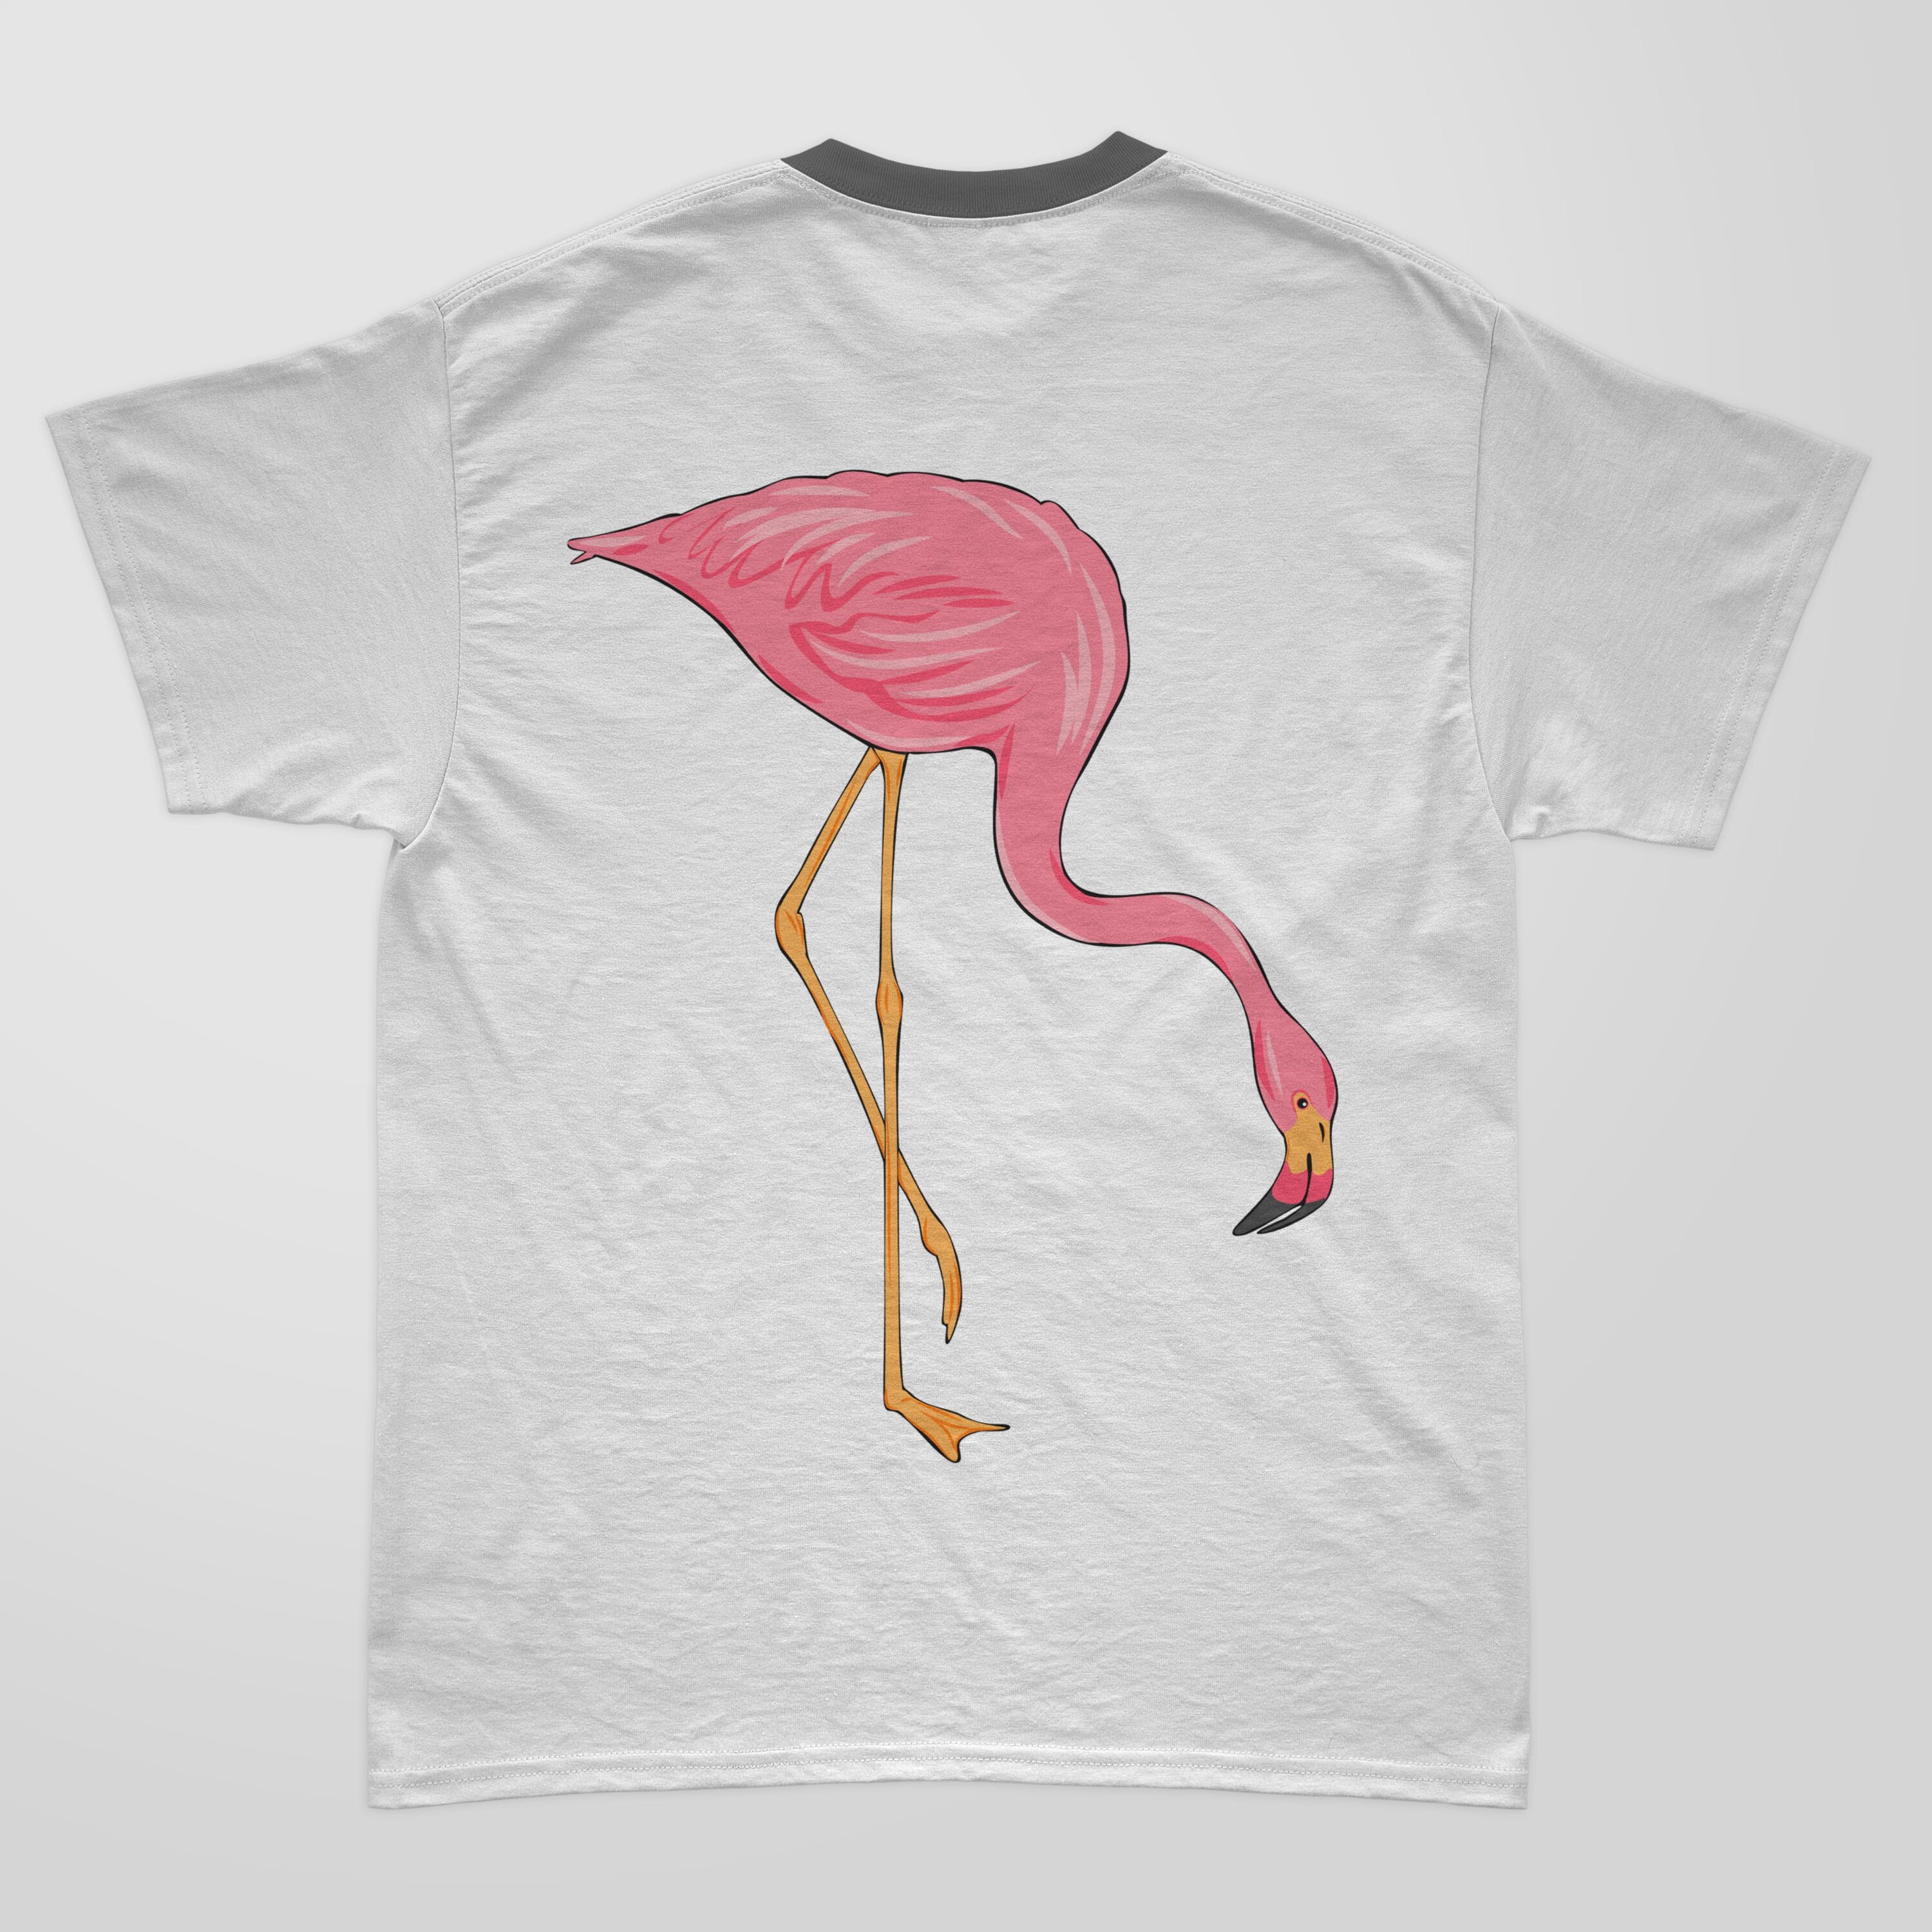 Classic pink flamingo on the classic white t-shirt.